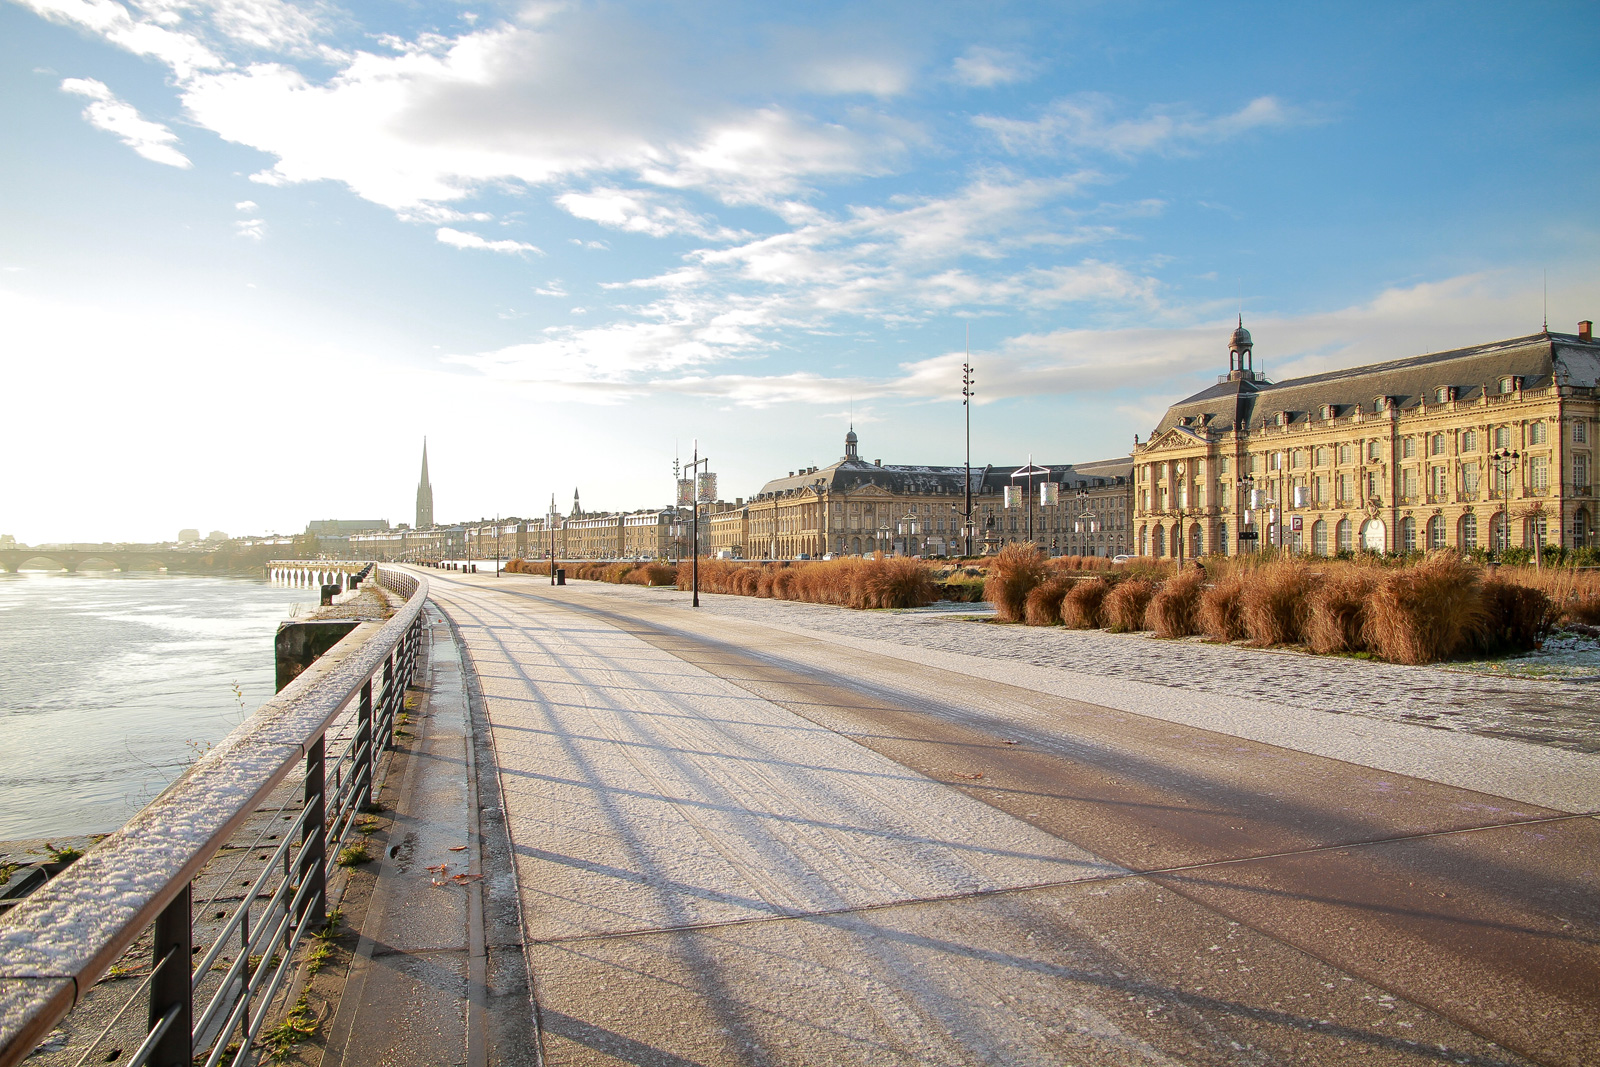 What to do in Bordeaux when it’s cold?